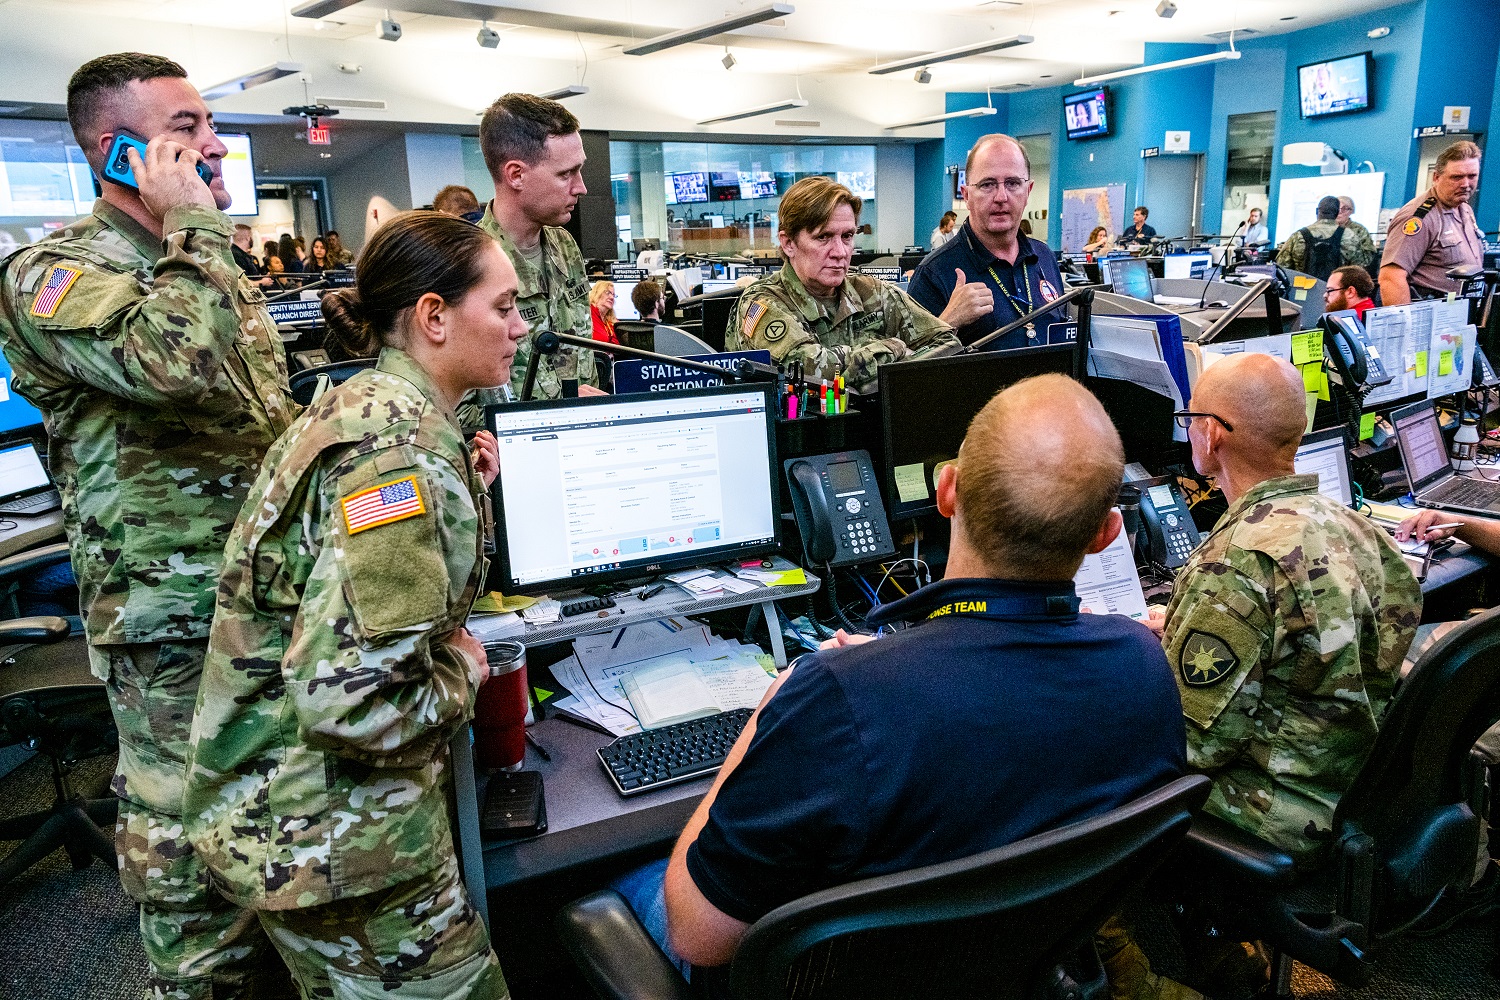 Uniformed military personnel standing around a computer with a FEMA employee.